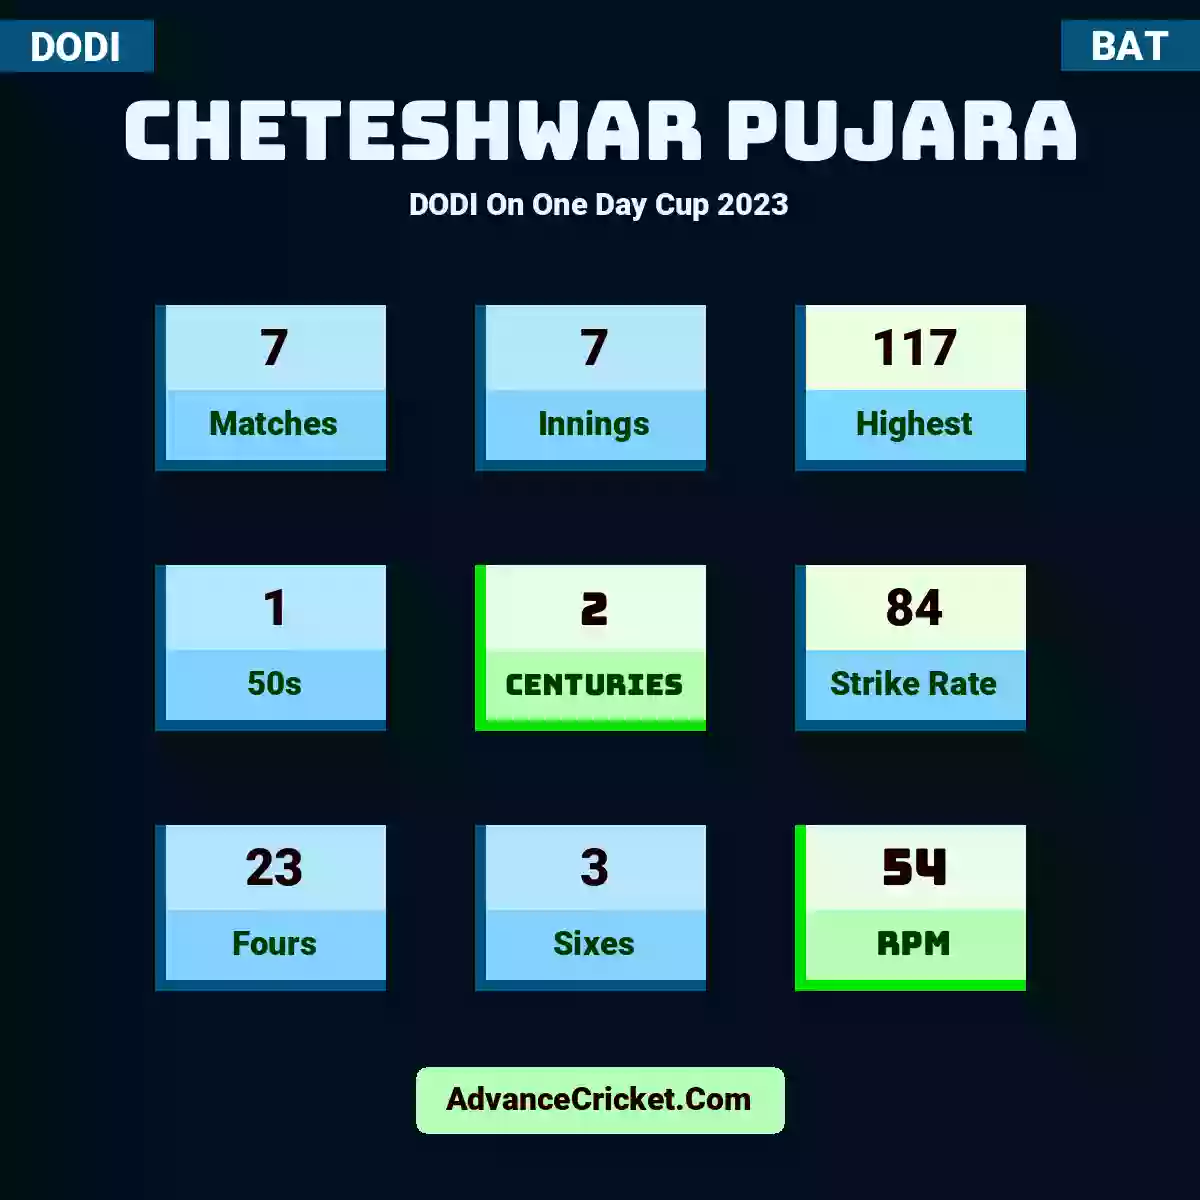 Cheteshwar Pujara DODI  On One Day Cup 2023, Cheteshwar Pujara played 7 matches, scored 117 runs as highest, 1 half-centuries, and 2 centuries, with a strike rate of 84. C.Pujara hit 23 fours and 3 sixes, with an RPM of 54.